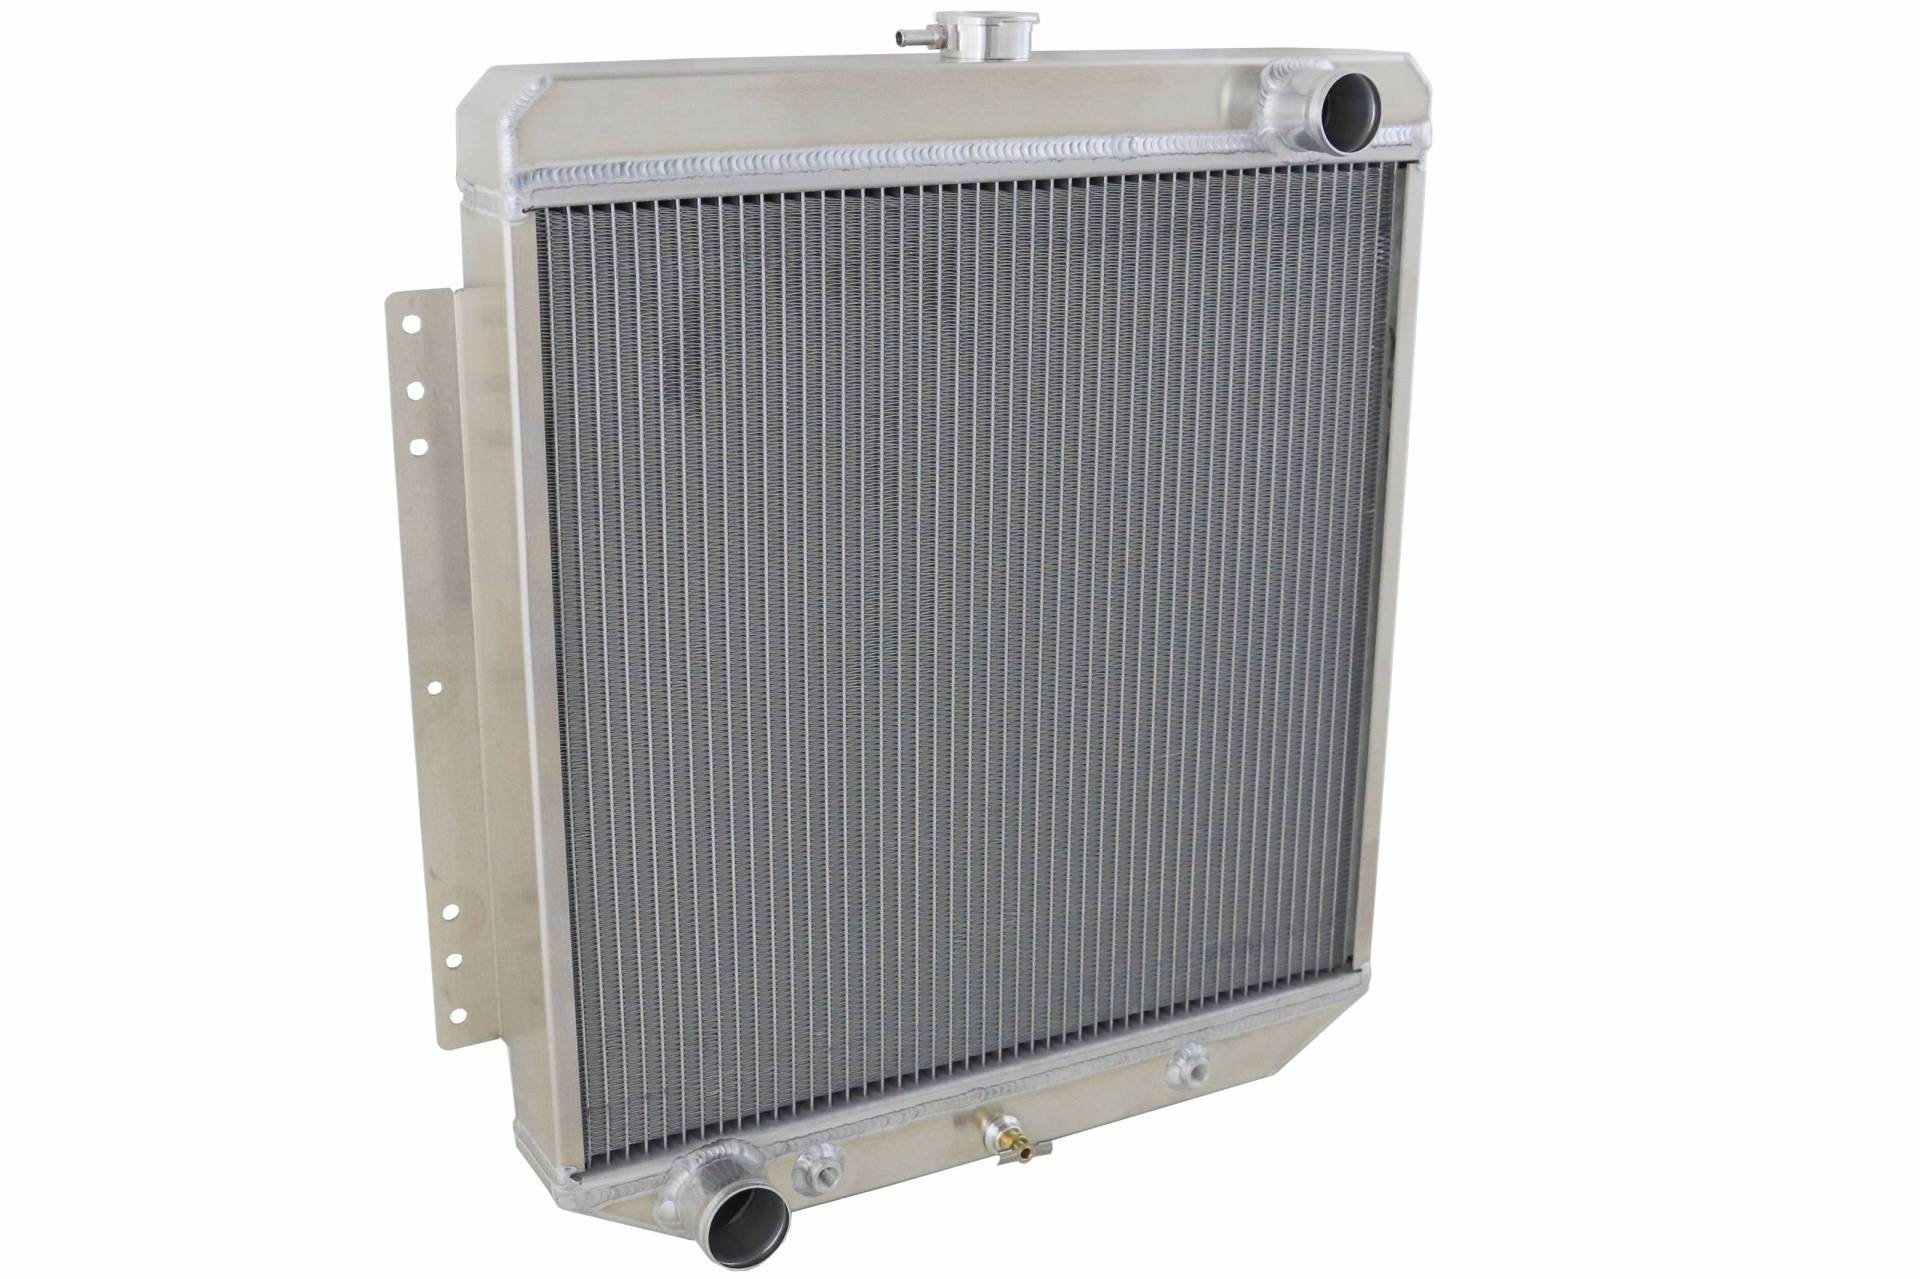 Wizard Cooling Inc - Wizard Cooling - 1956-57 Lincoln Aluminum Radiator - 41000-210